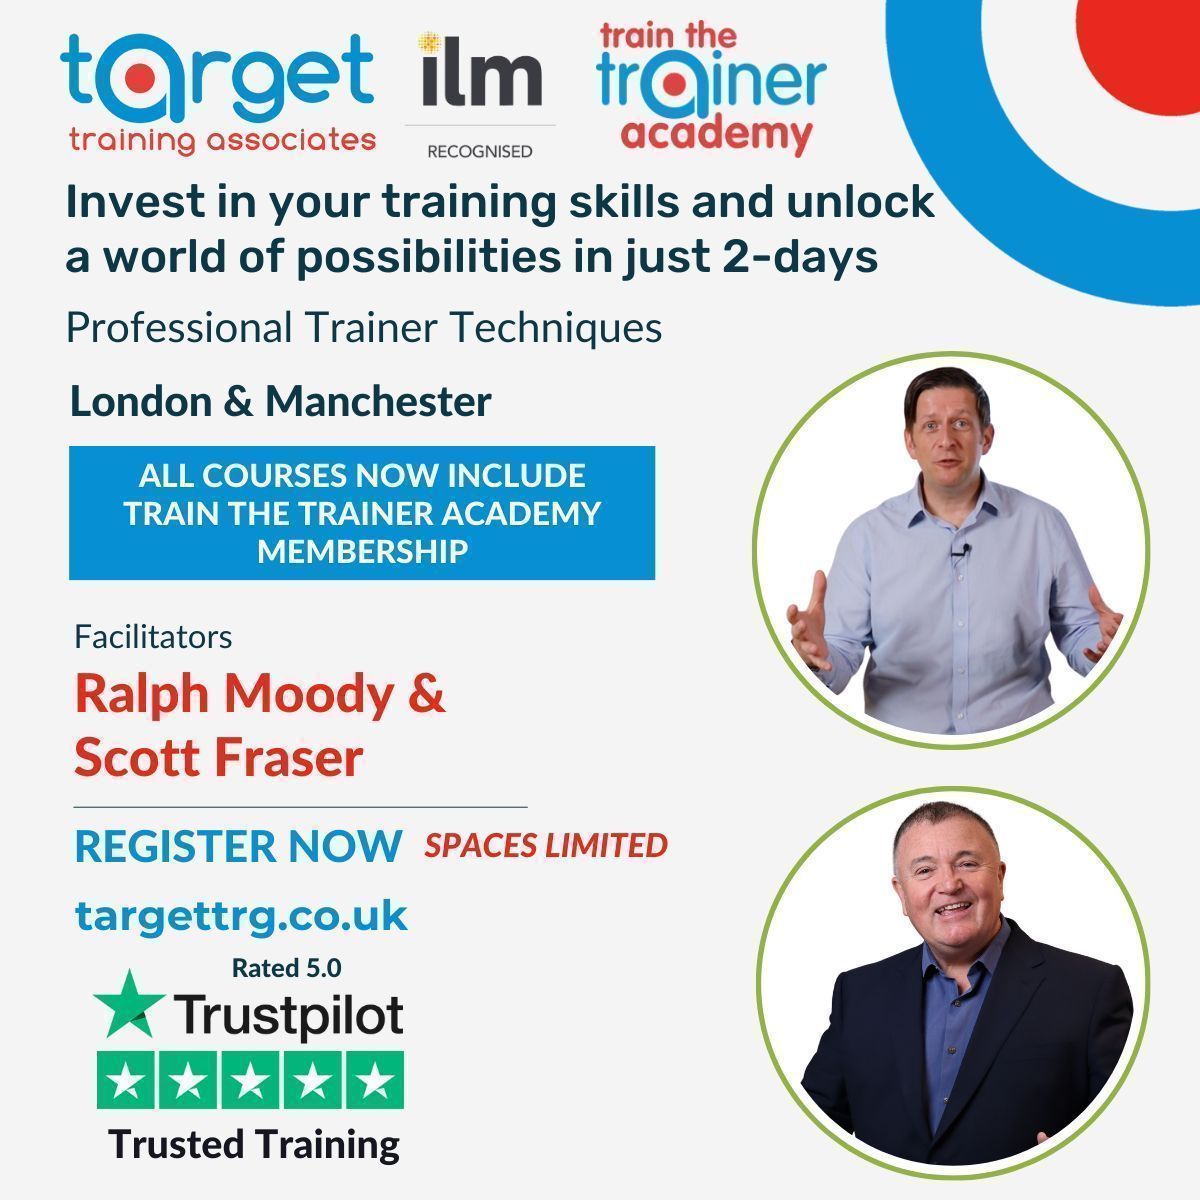 🎓 Calling all trainers-to-be! Our Manchester/London courses are THE place to be.
With hands-on learning, personalised support & rave reviews, you'll be ready to hit the ground running.
Don't wait, book your place now: buff.ly/42GB1GZ 🌟🚀
#FutureTrainers #TrainTheTrainer